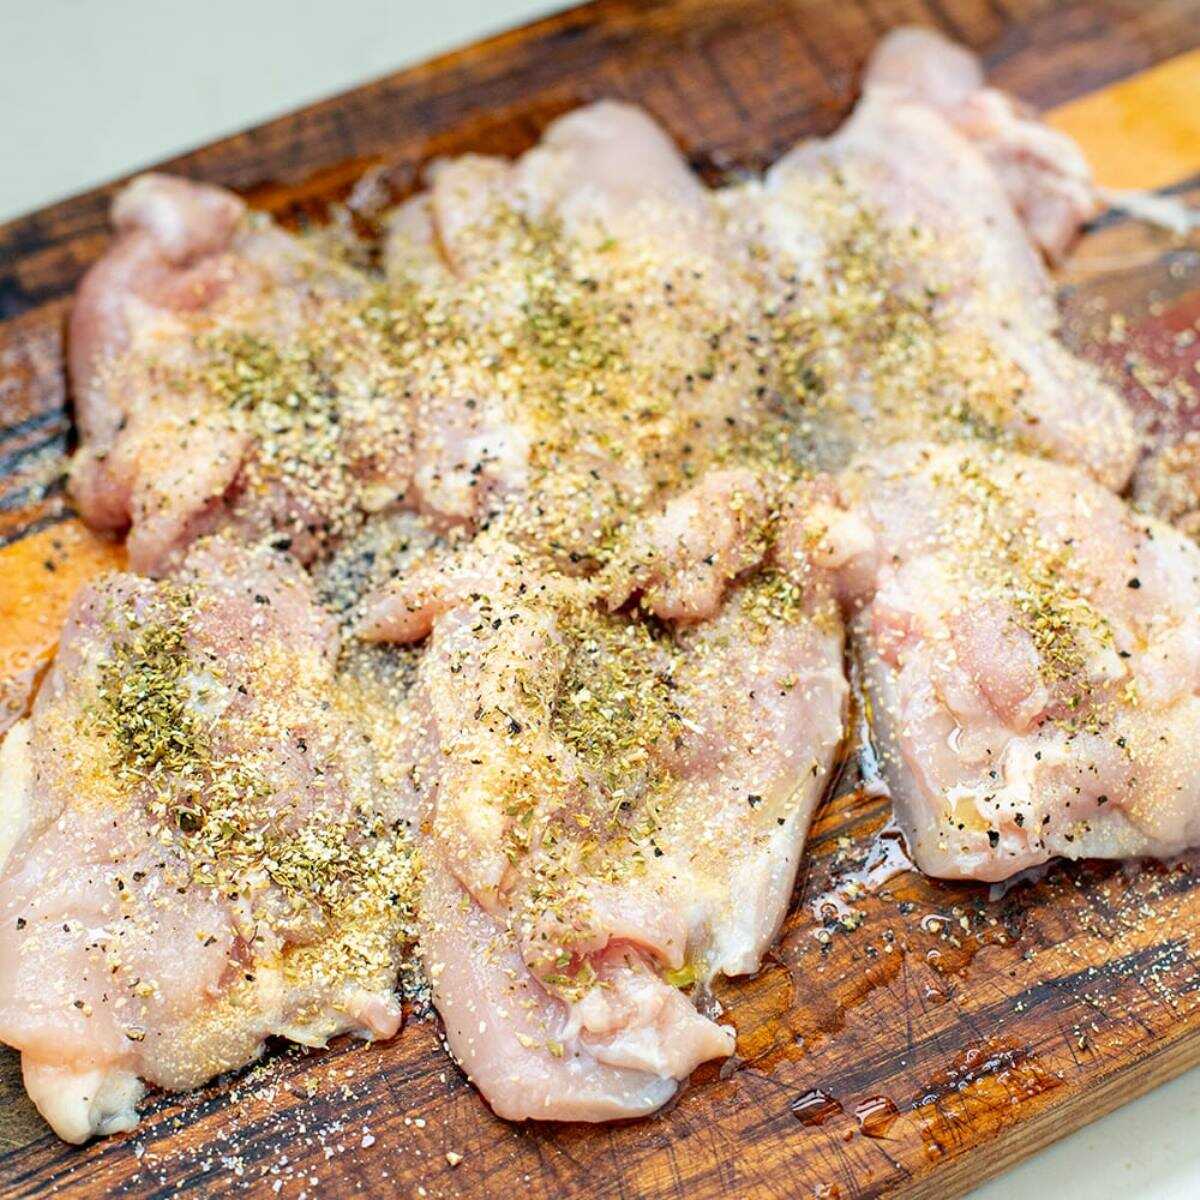 marinate the chicken before cooking